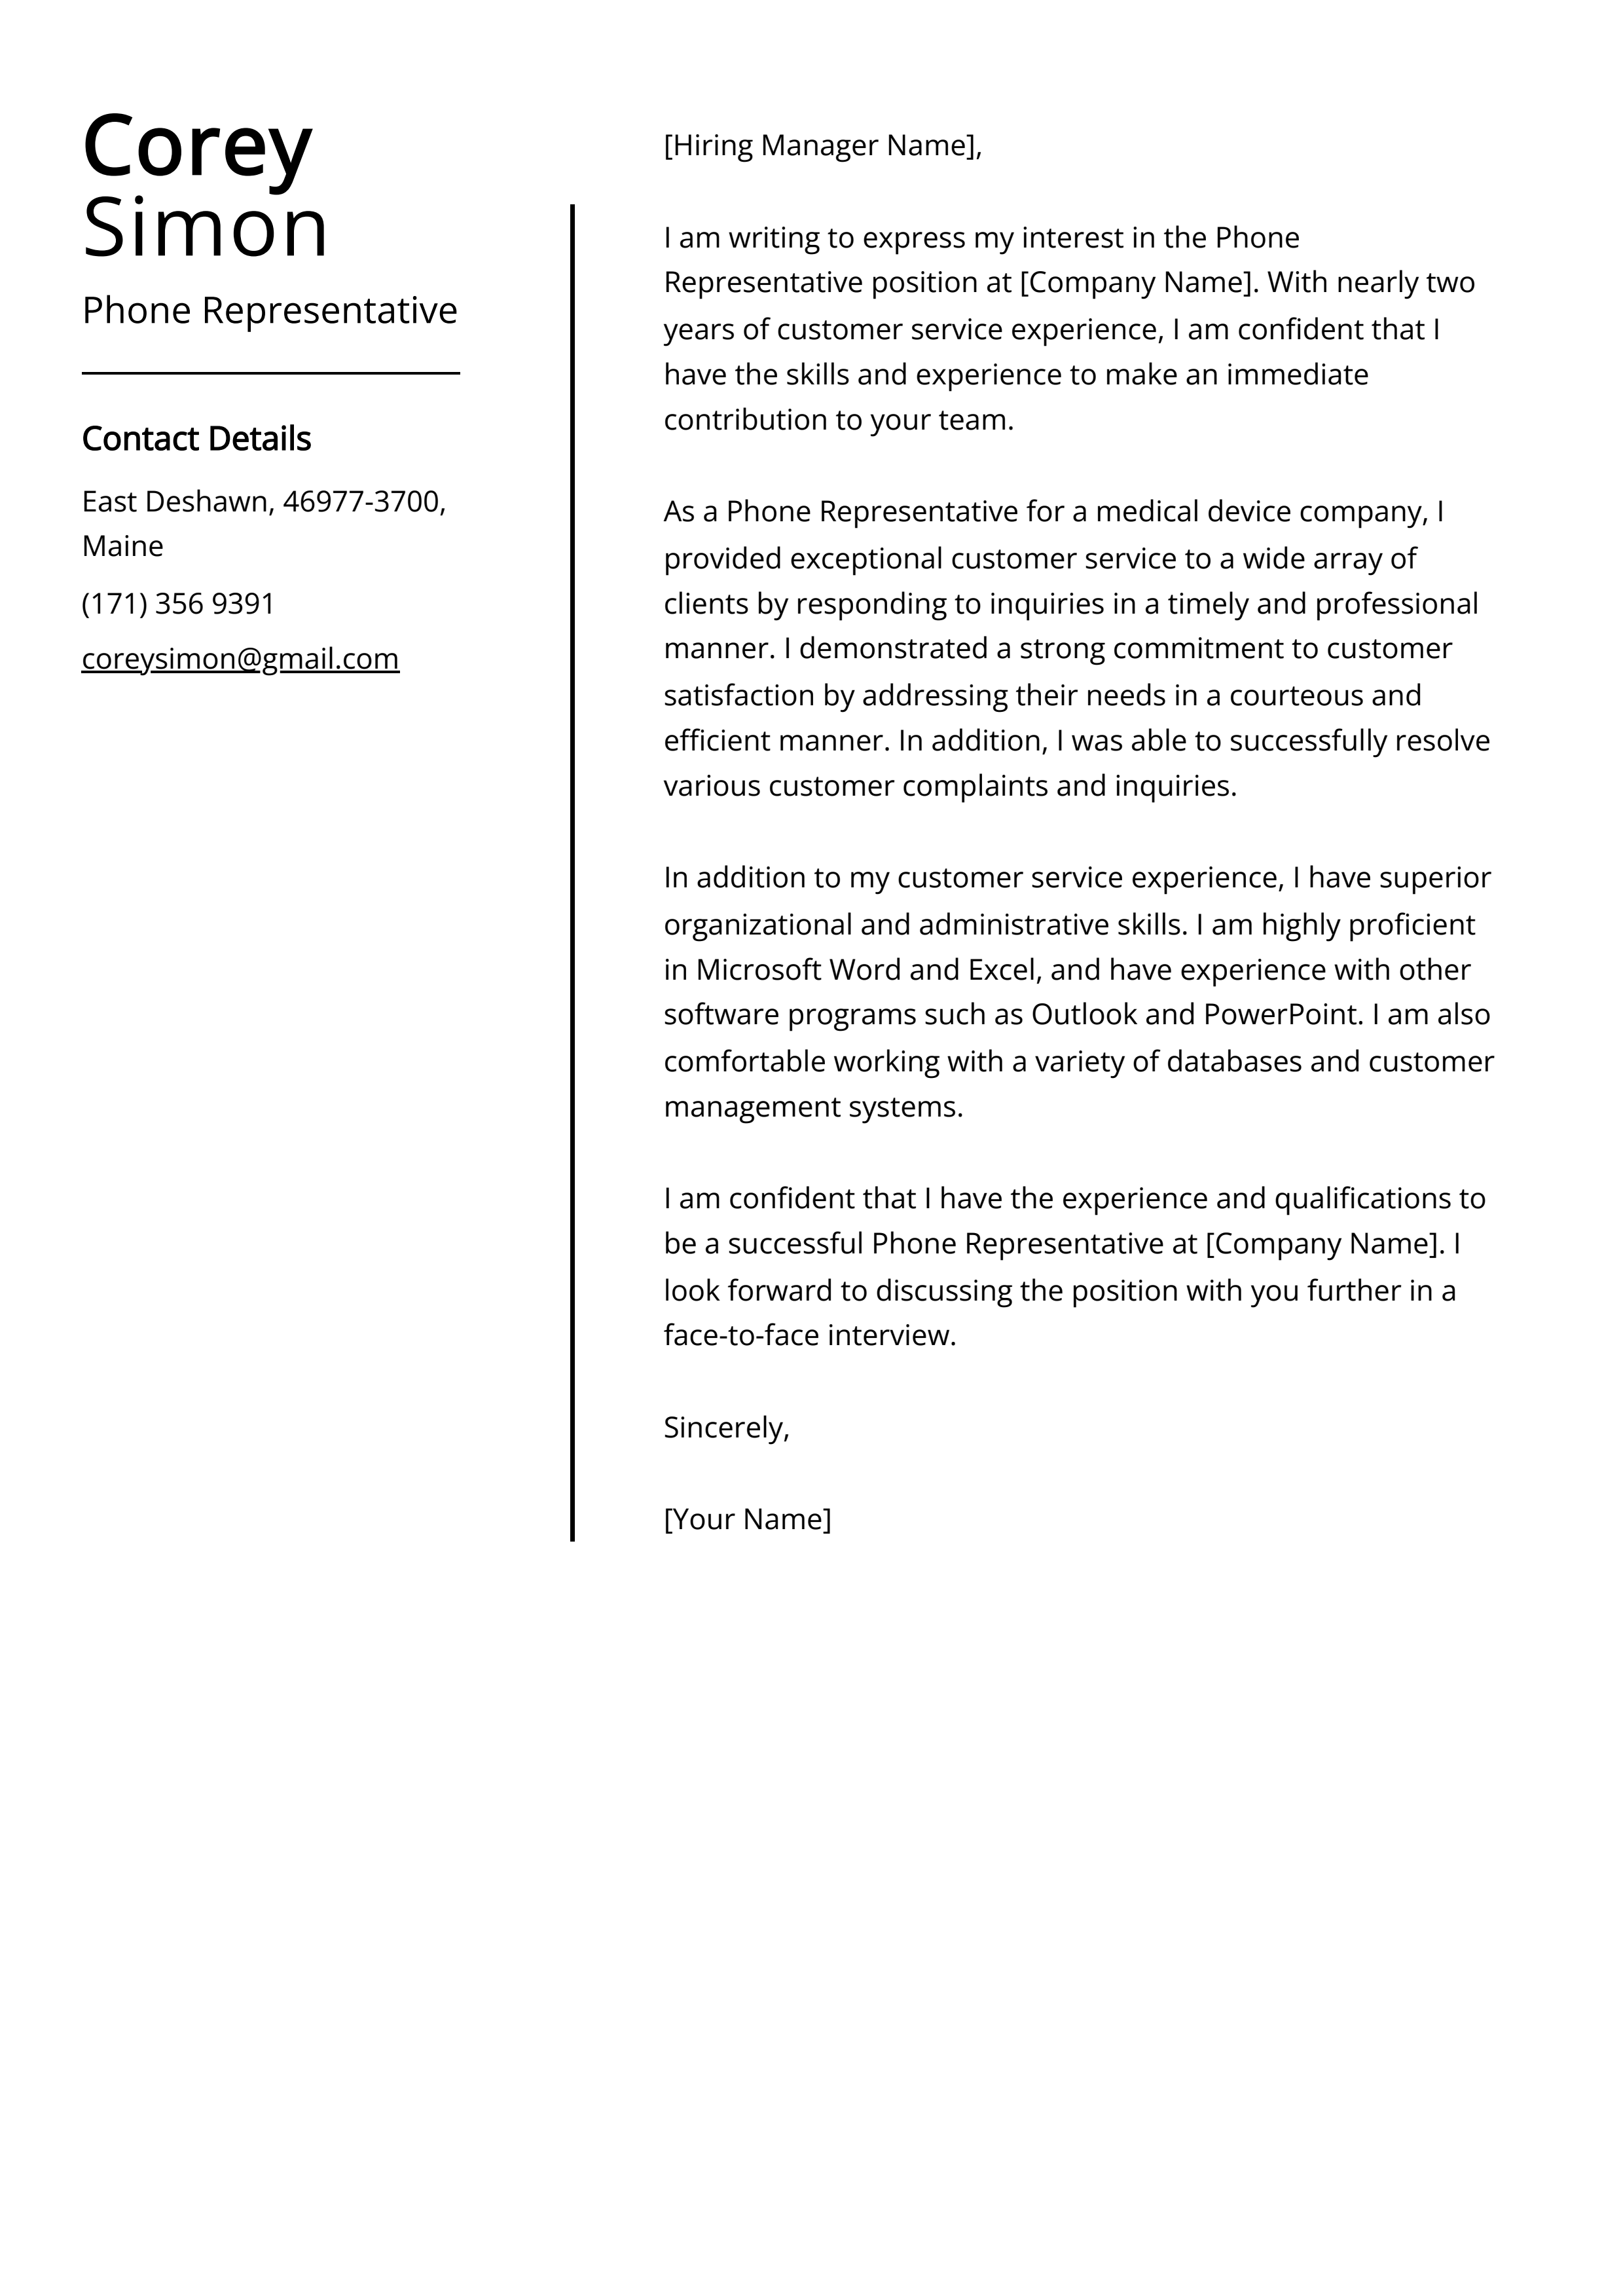 Phone Representative Cover Letter Example